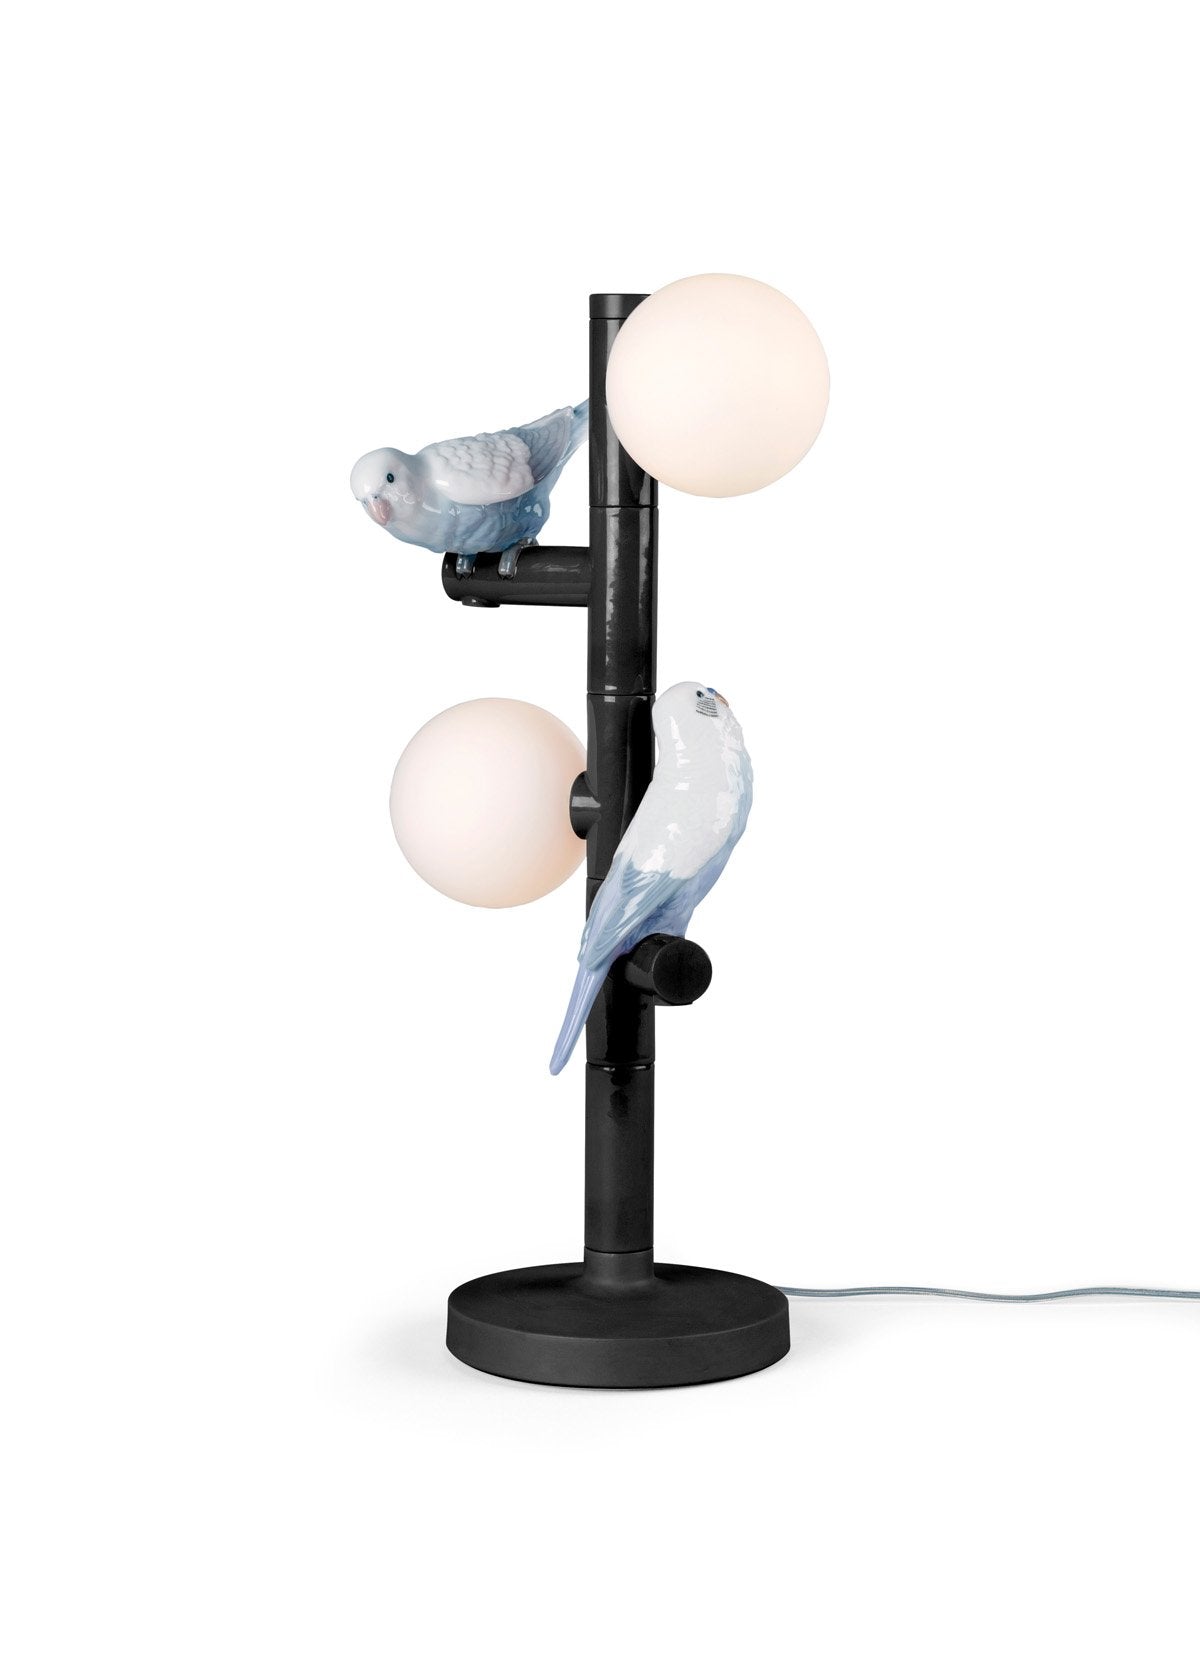 Parrot Party Table Lamp in Black - FormFluent